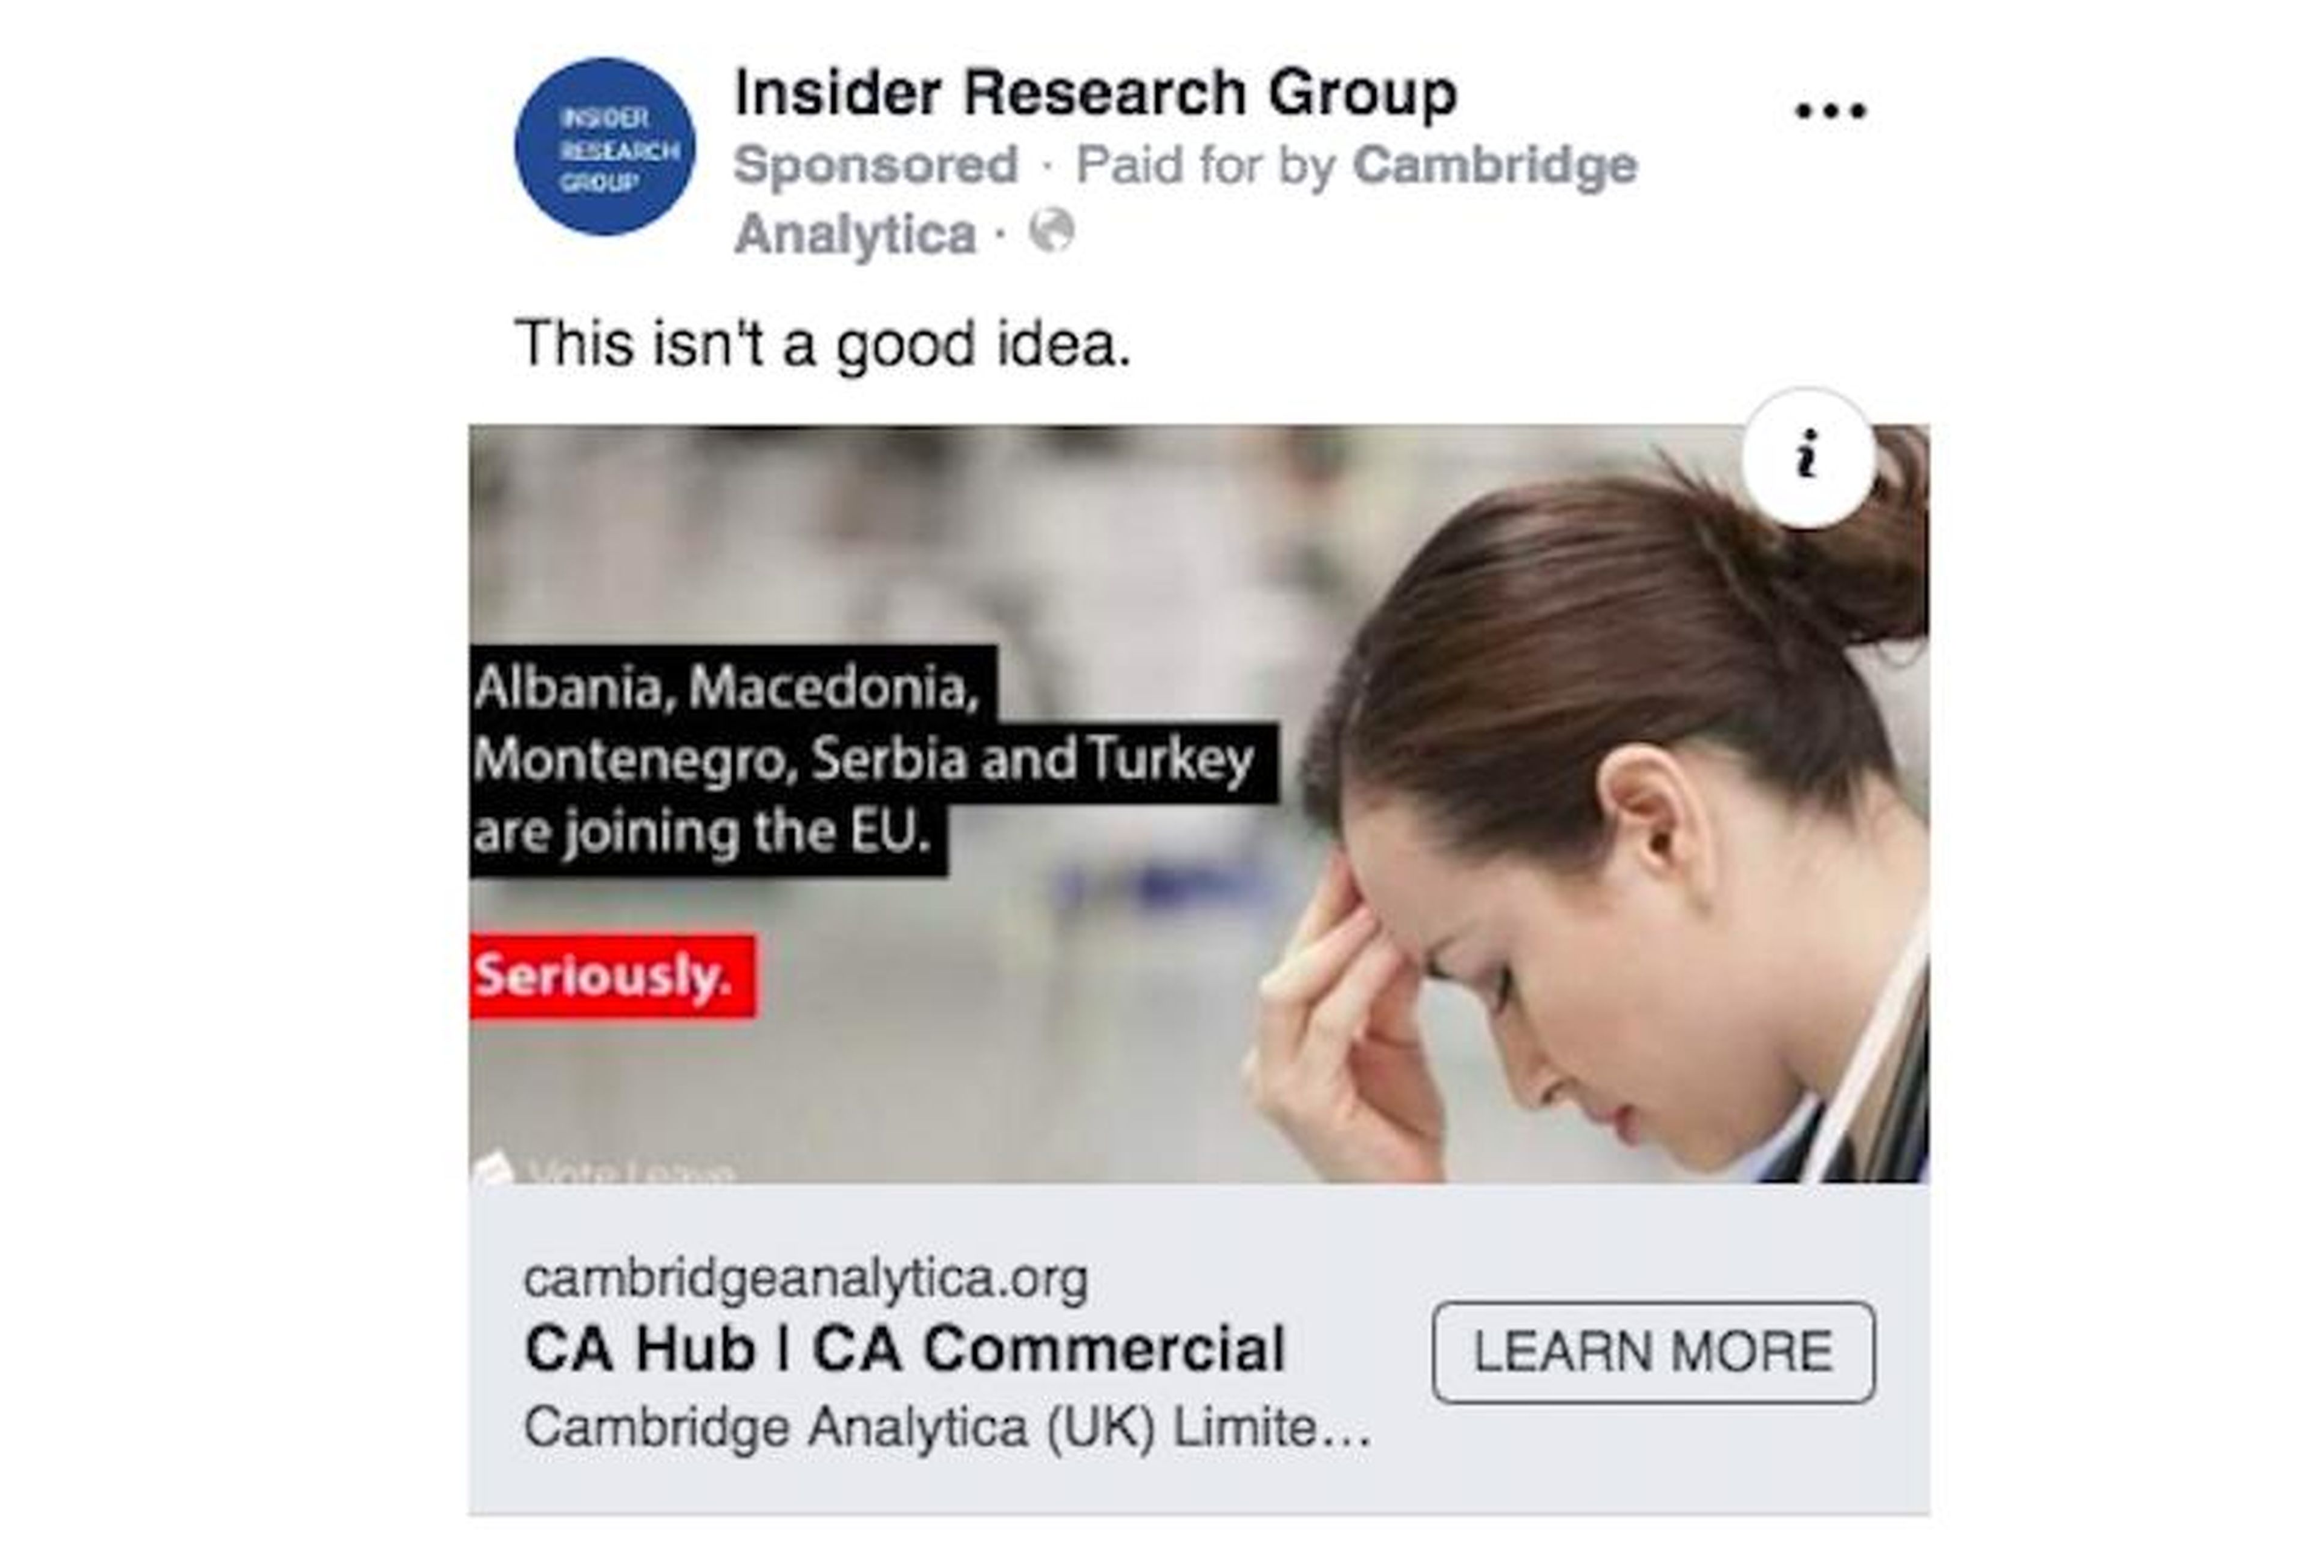 We ran 2 fake ads pretending to be Cambridge Analytica — and Facebook failed to catch that they were frauds